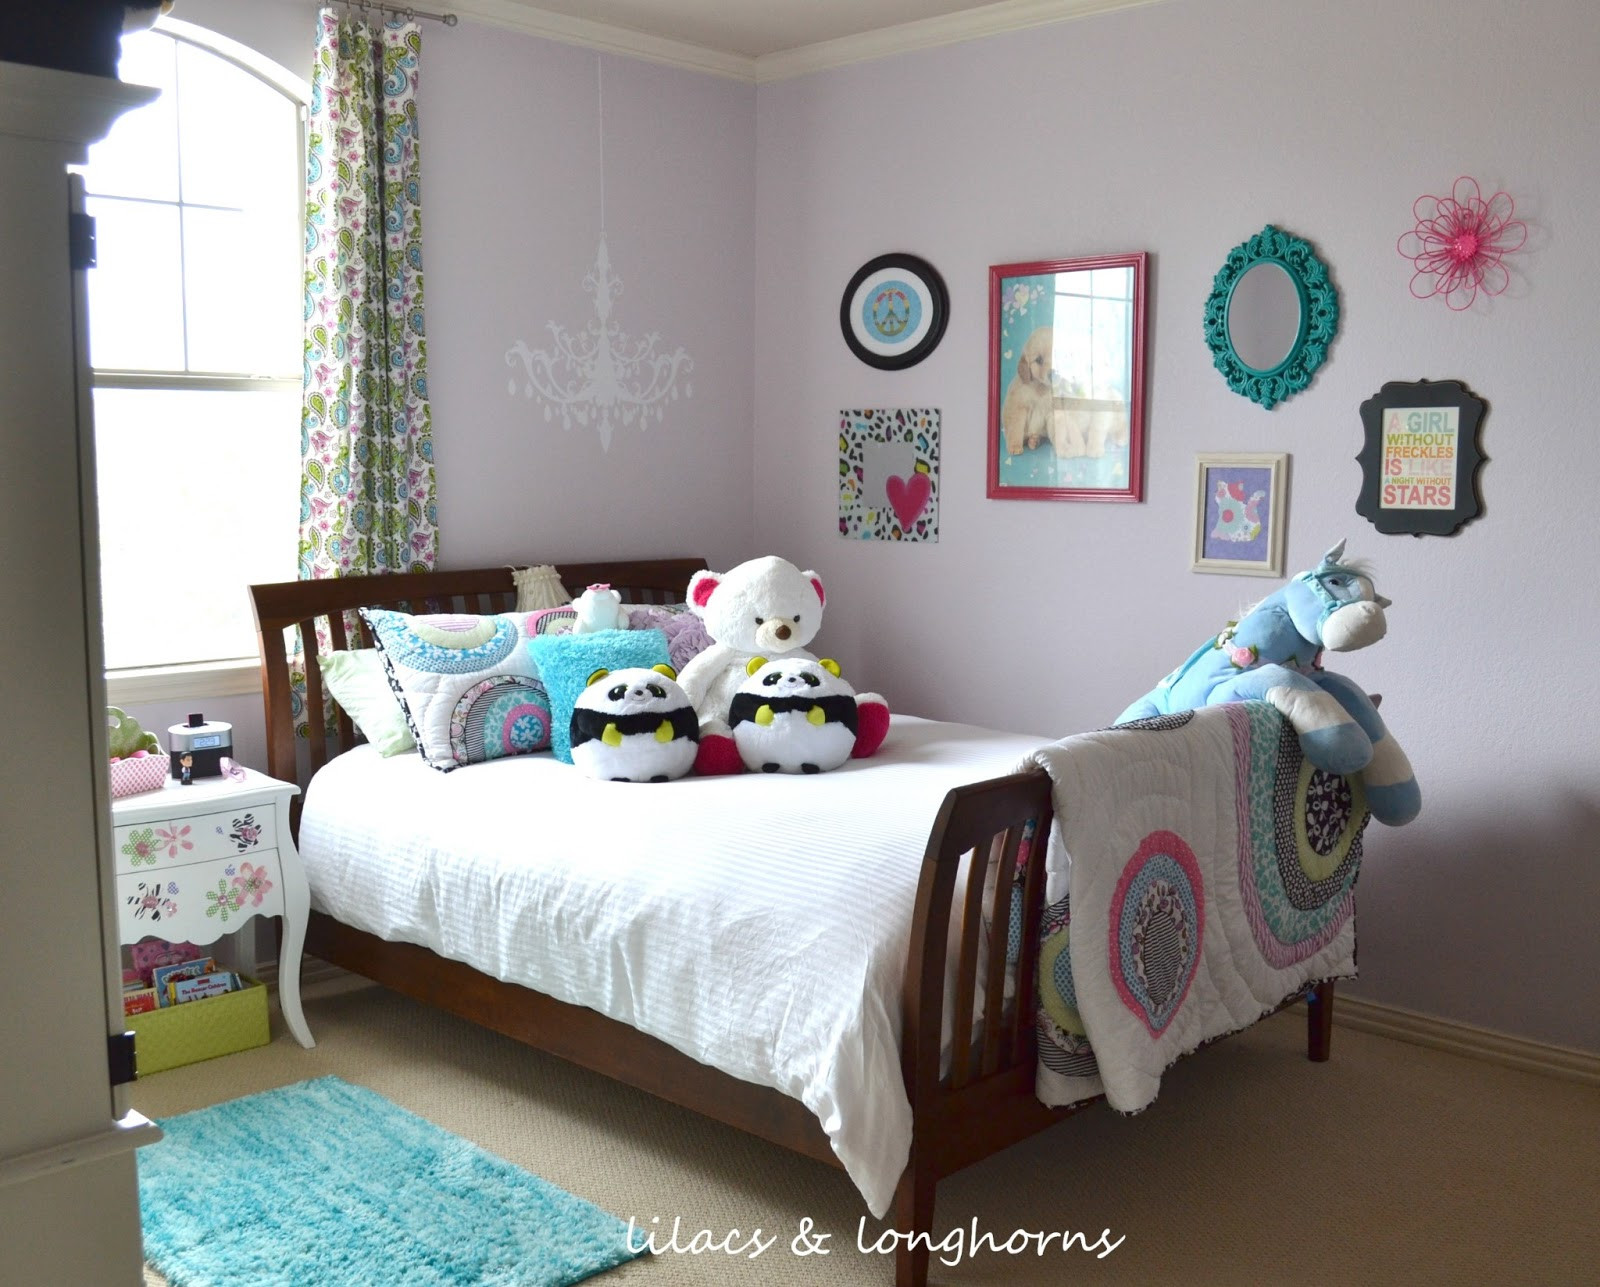 Girls Bedroom Pictures
 Tween Girl s Room Reveal Lilacs and LonghornsLilacs and